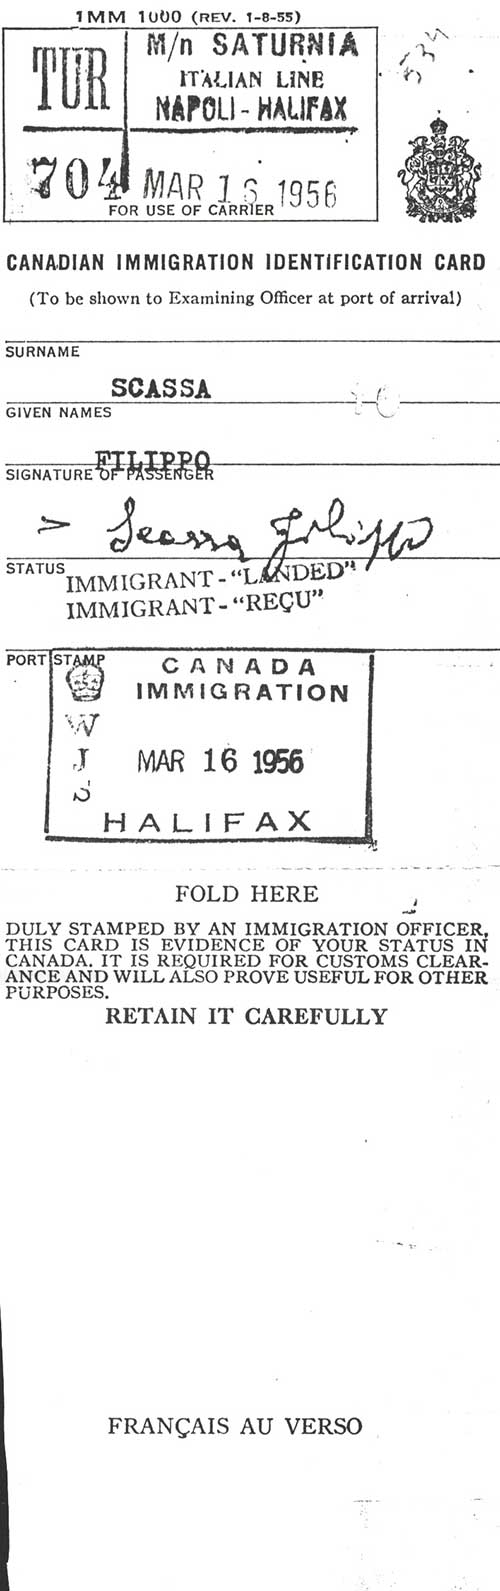 Canadian Immigration Identification Cards issued to Filippo Scassa, 1956. Canadian Museum of Immigration at Pier 21 (DI2013.1814.3).